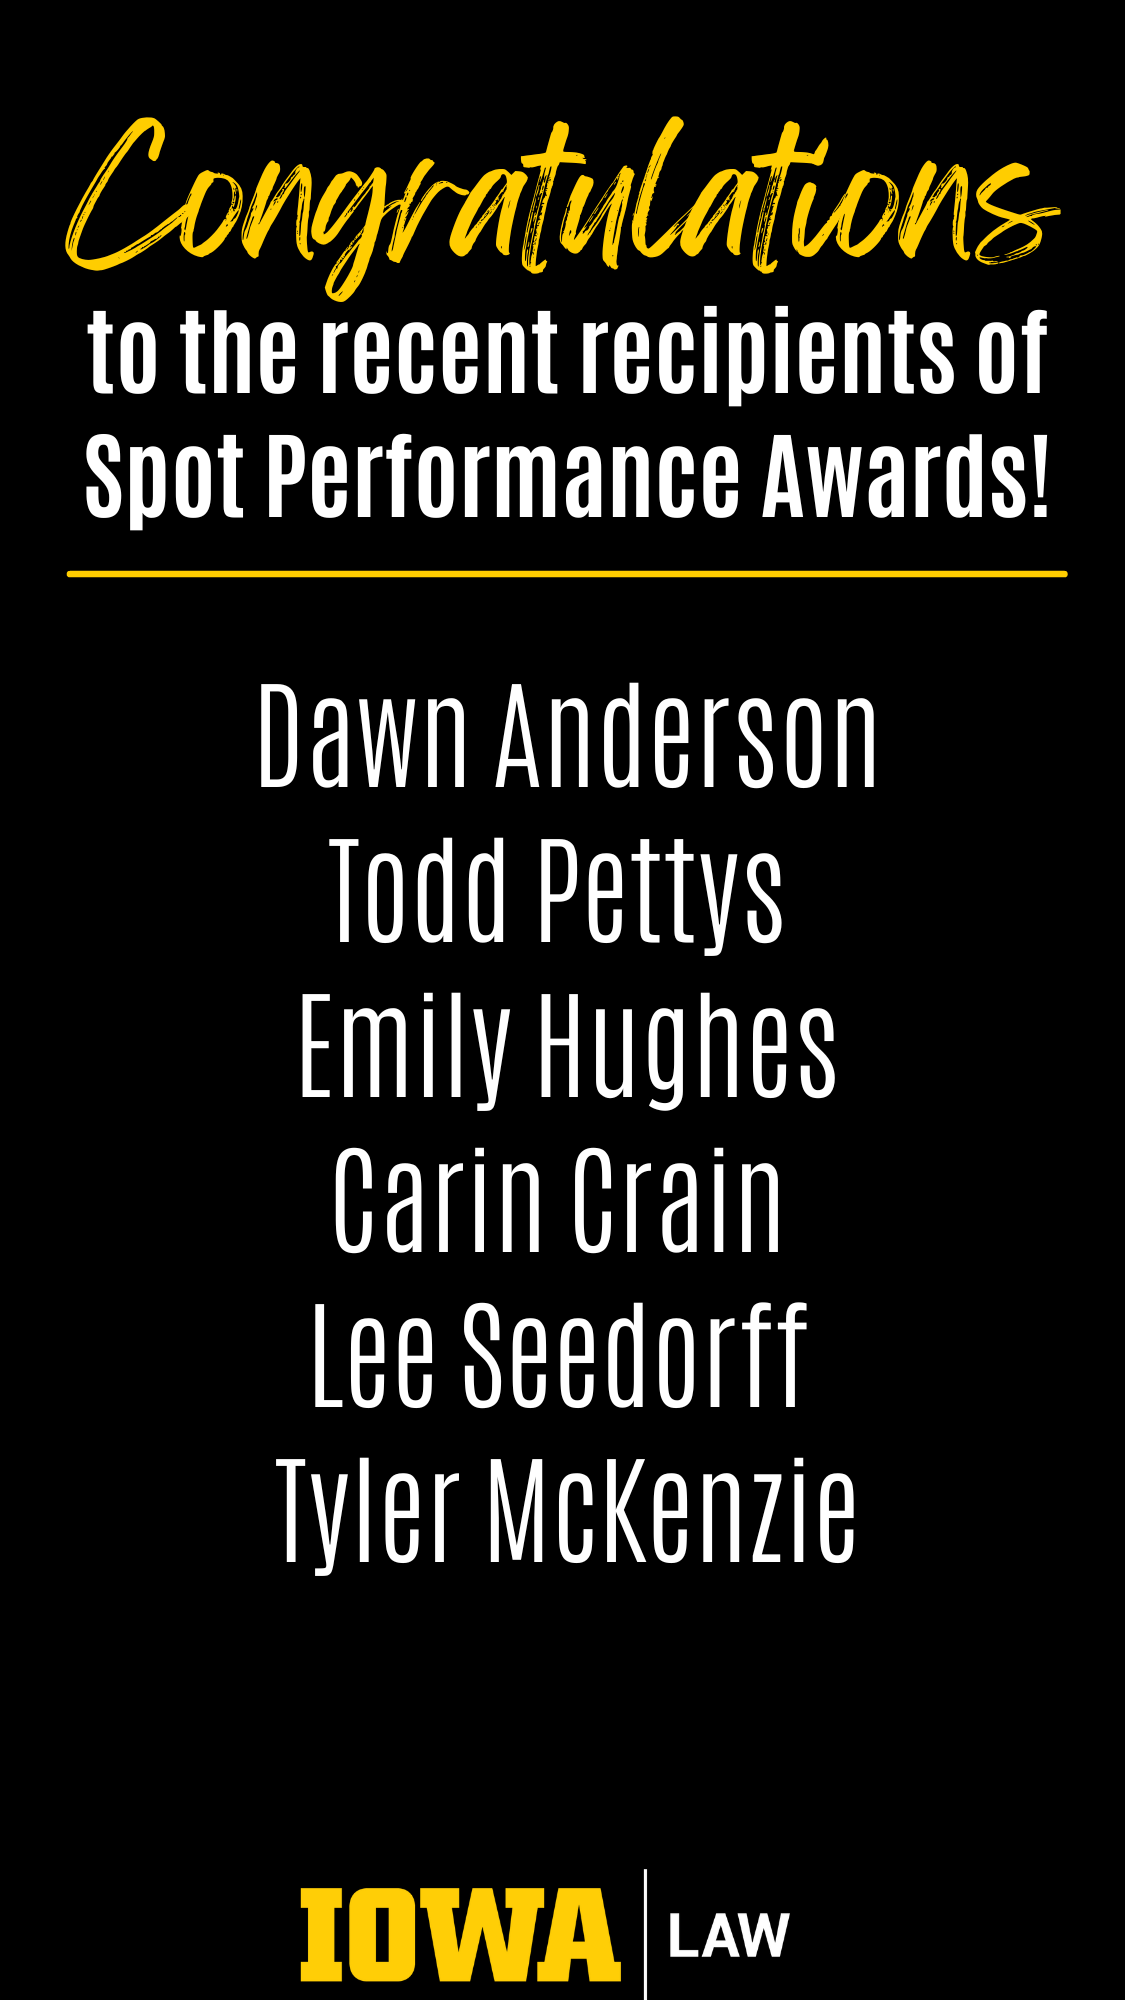 Congratulations to the recent recipients of Spot Performance Awards! Dawn Anderson Todd Pettys  Emily Hughes Carin Crain  Lee Seedorff  Tyler McKenzie